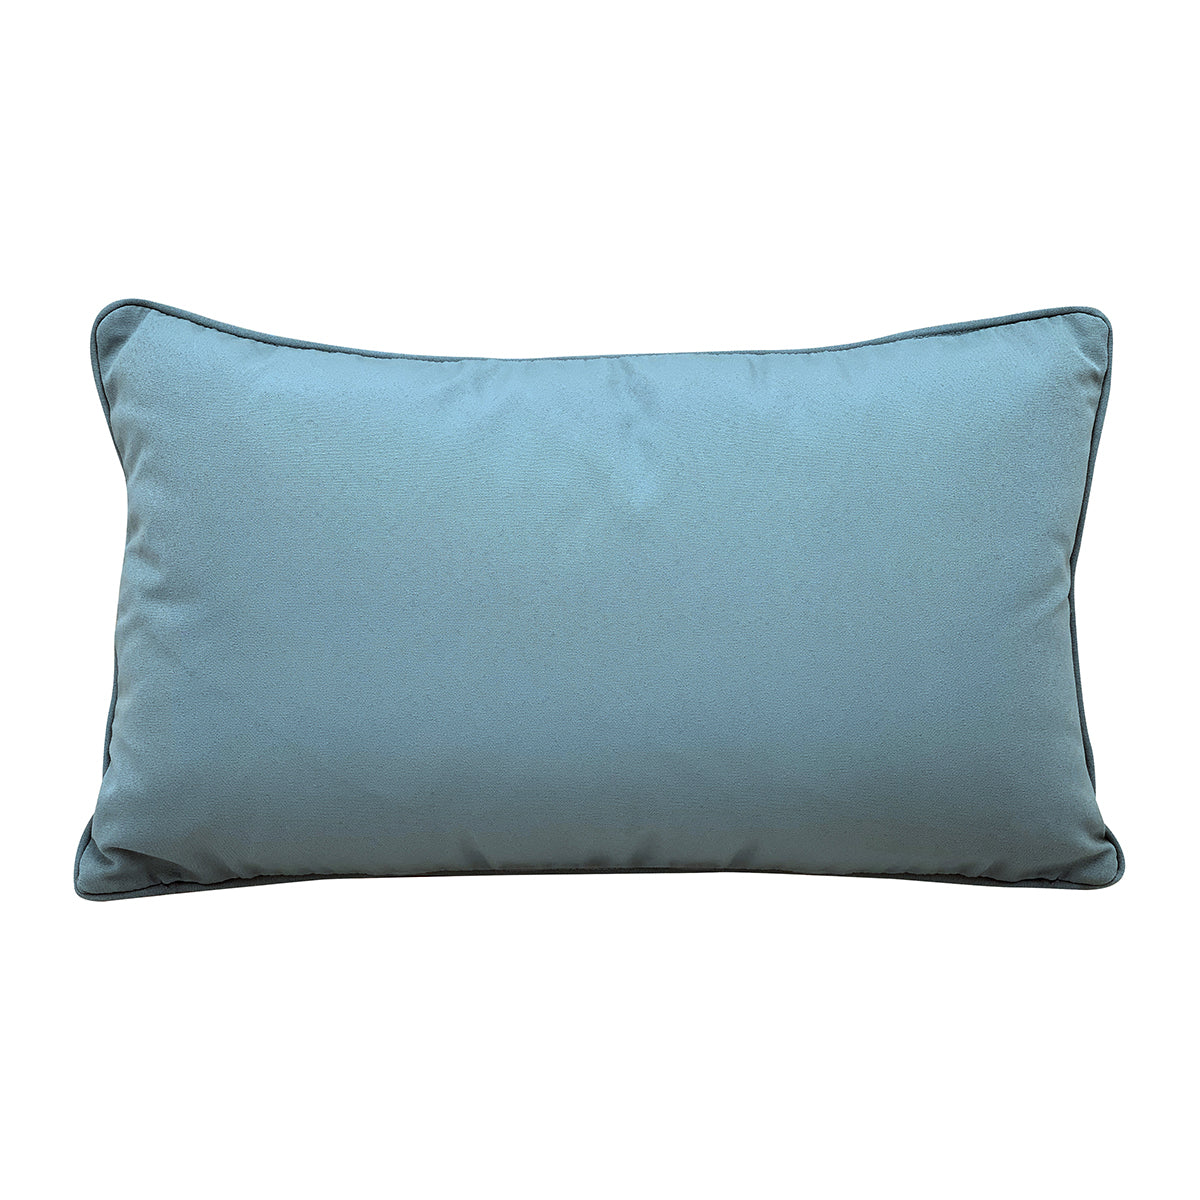 Solid blue fabric; back side of the Can't Catch Me Flying Fish pillow